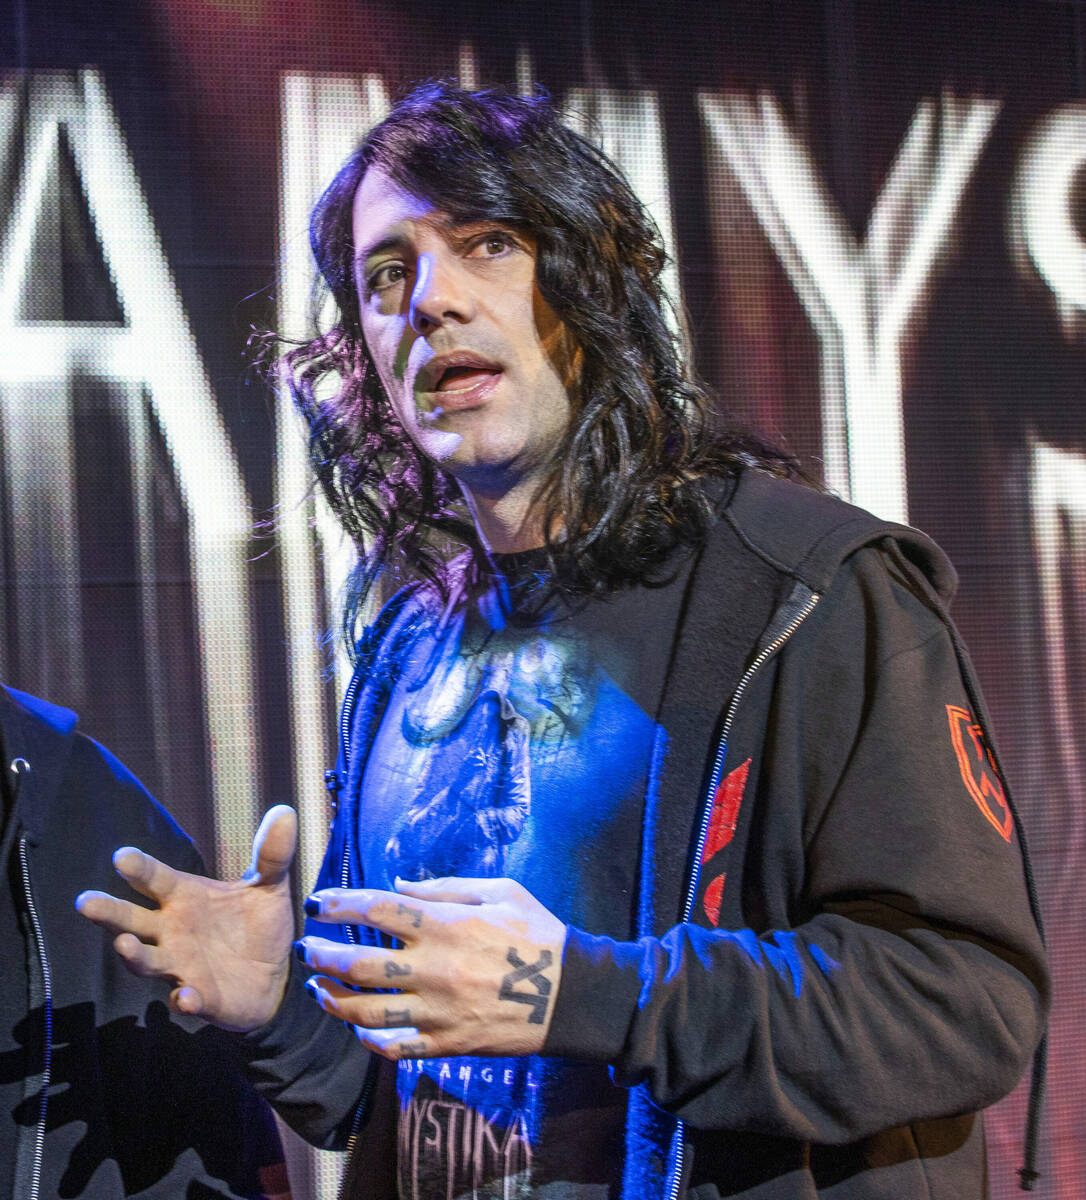 "Amystika" co-creator Criss Angel talks about the new production prior to opening night at the ...